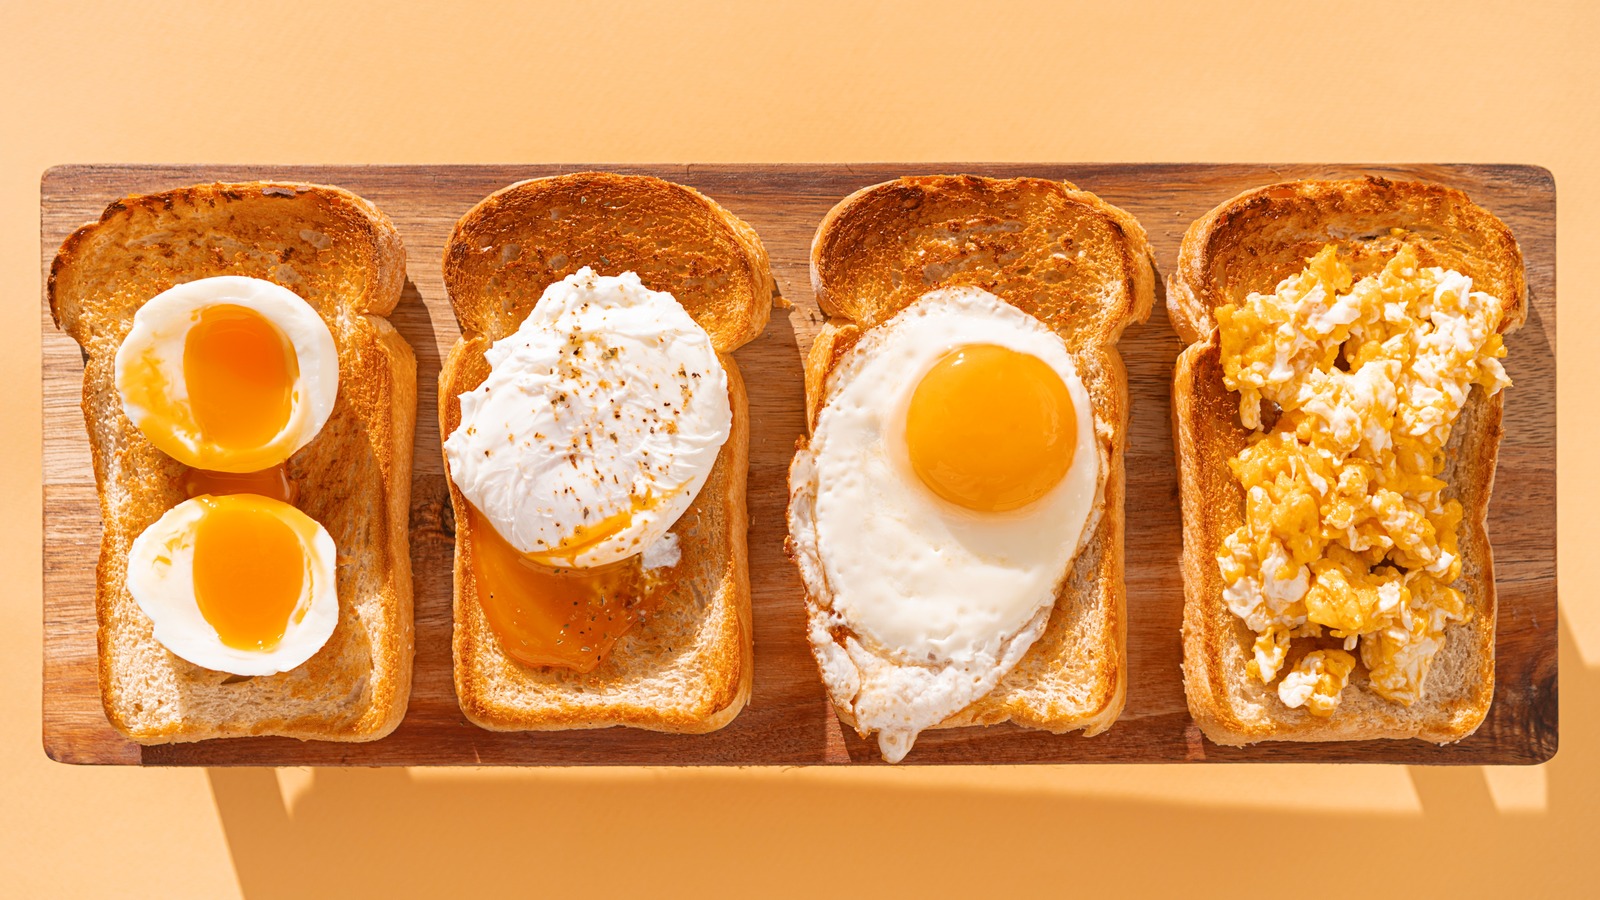 https://www.tastingtable.com/img/gallery/15-tips-you-need-when-cooking-with-eggs/l-intro-1666020145.jpg